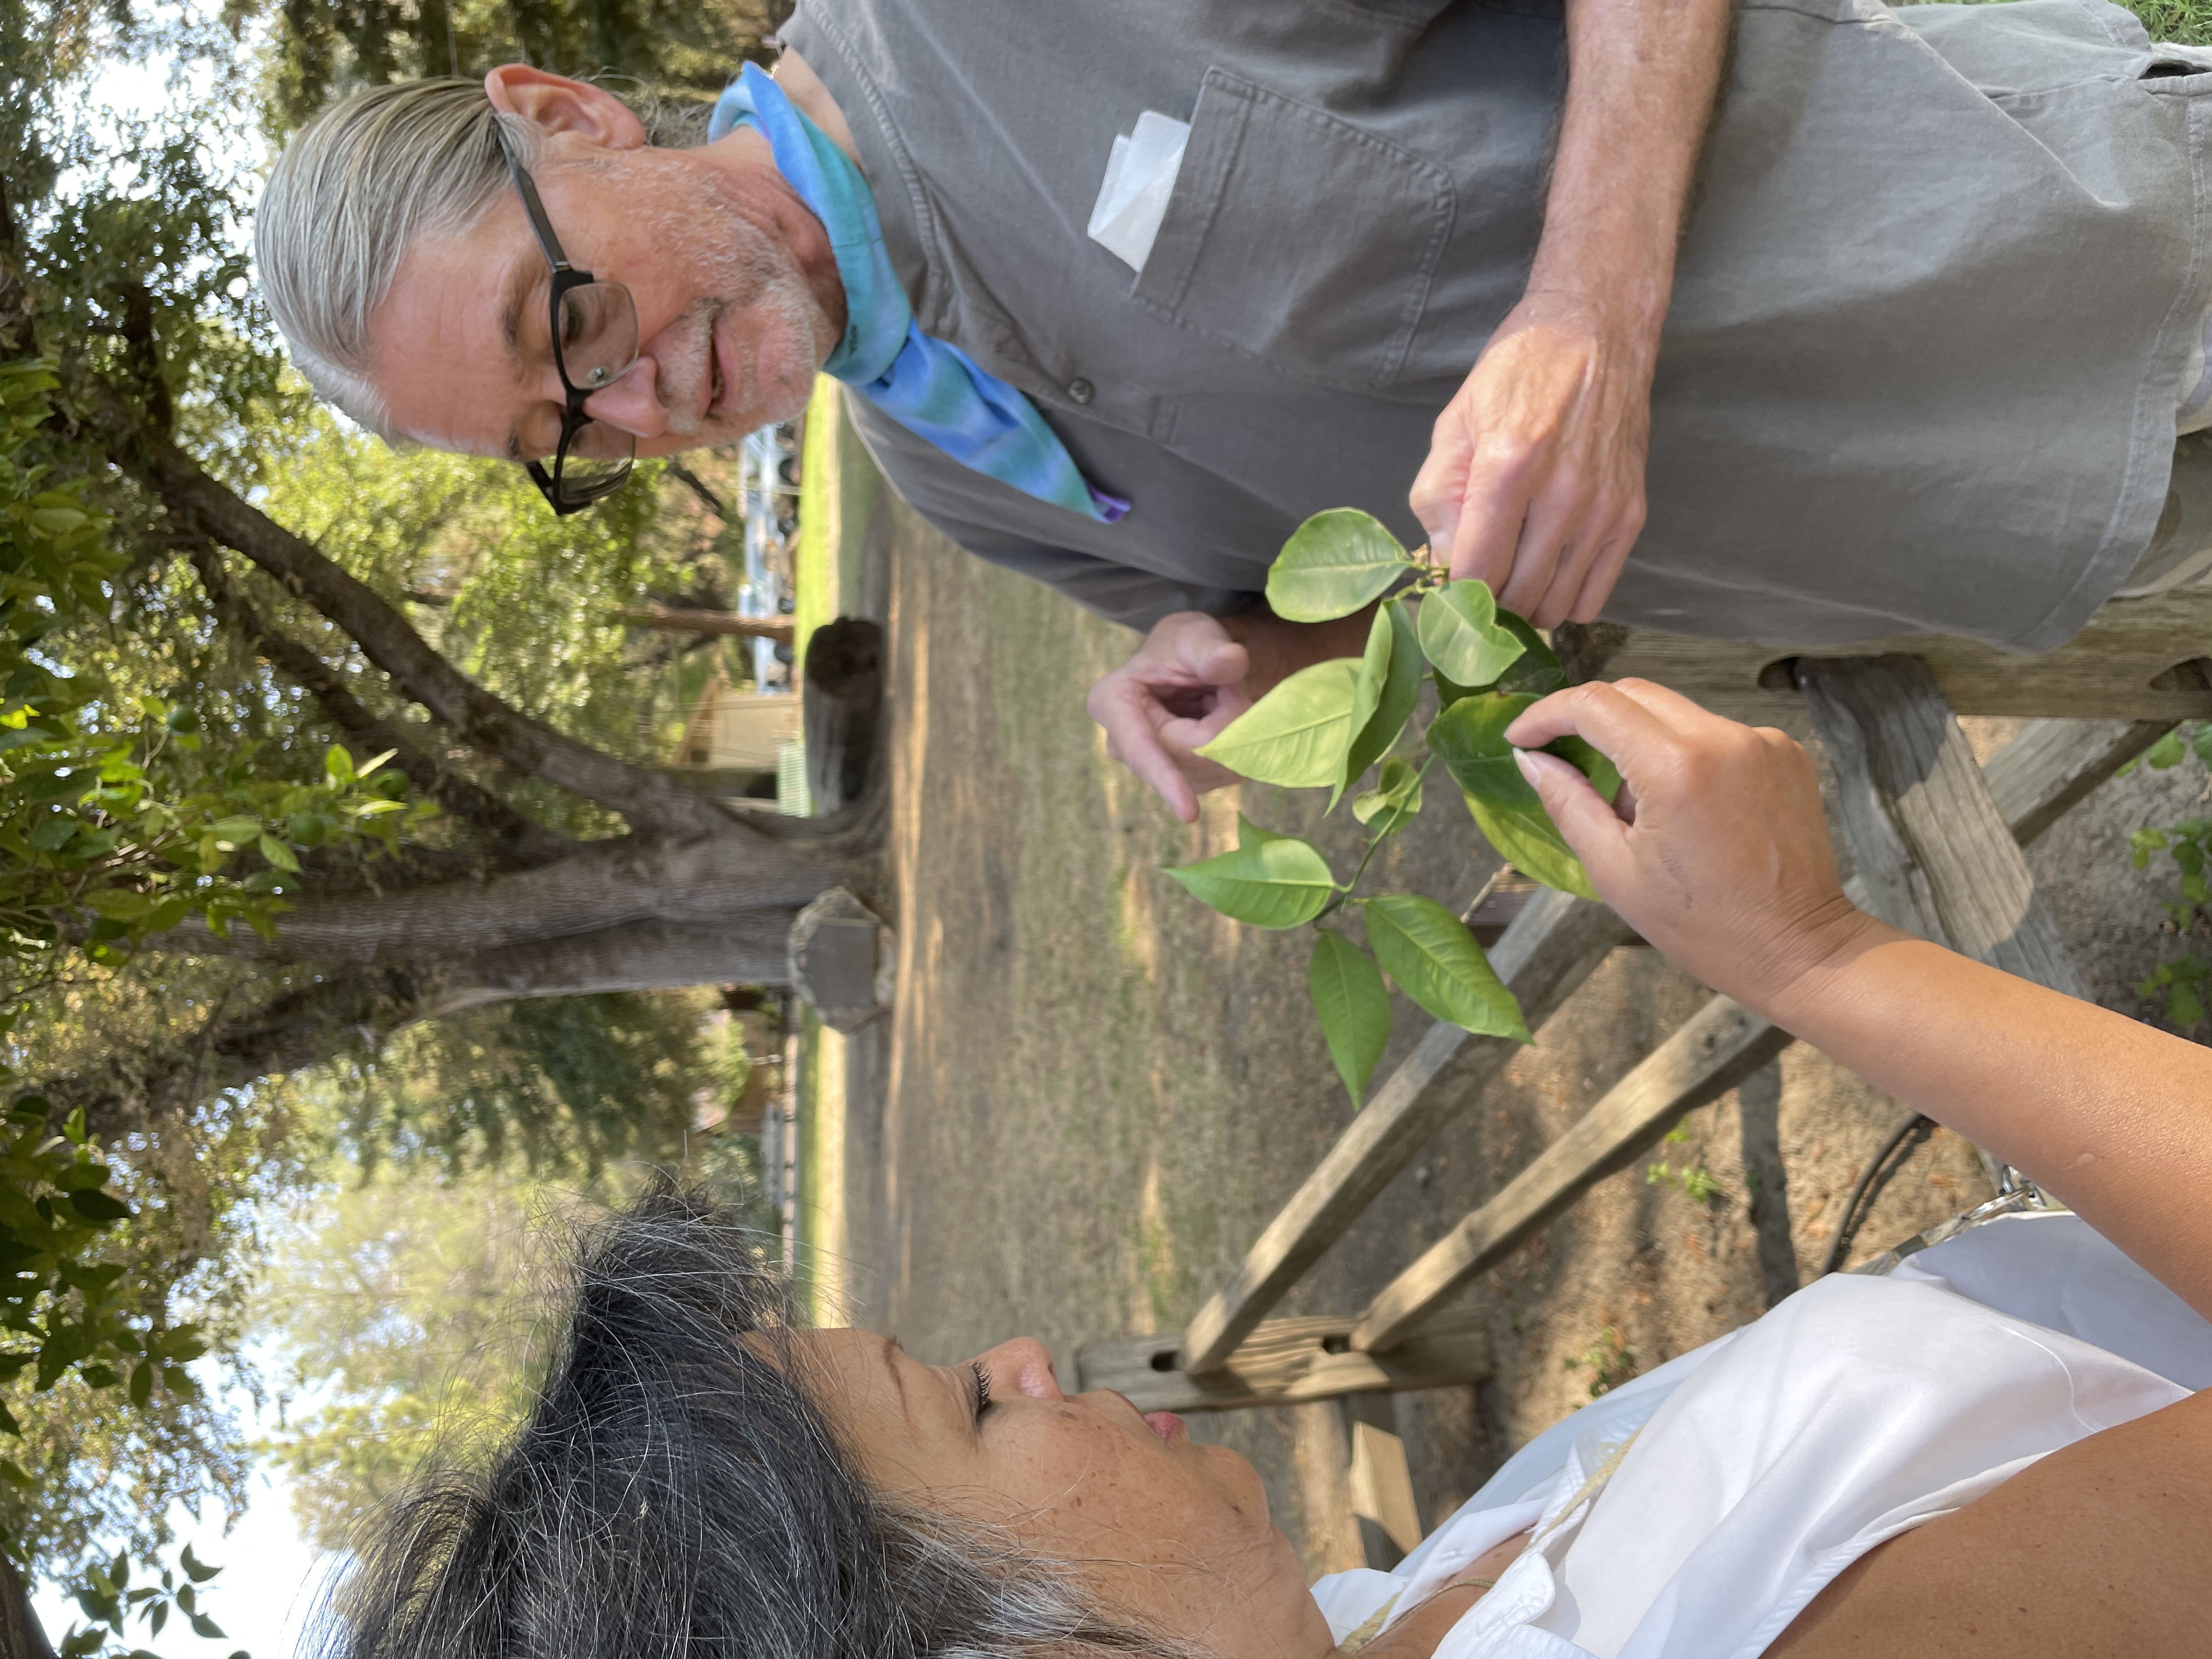 Robert Krueger, Curator and Research Leader from UC Riverside Citrus Valley Collection talks with Peña Adobe Historical Society volunteer, Cricket about the orange tree located at the Peña Adobe Park.